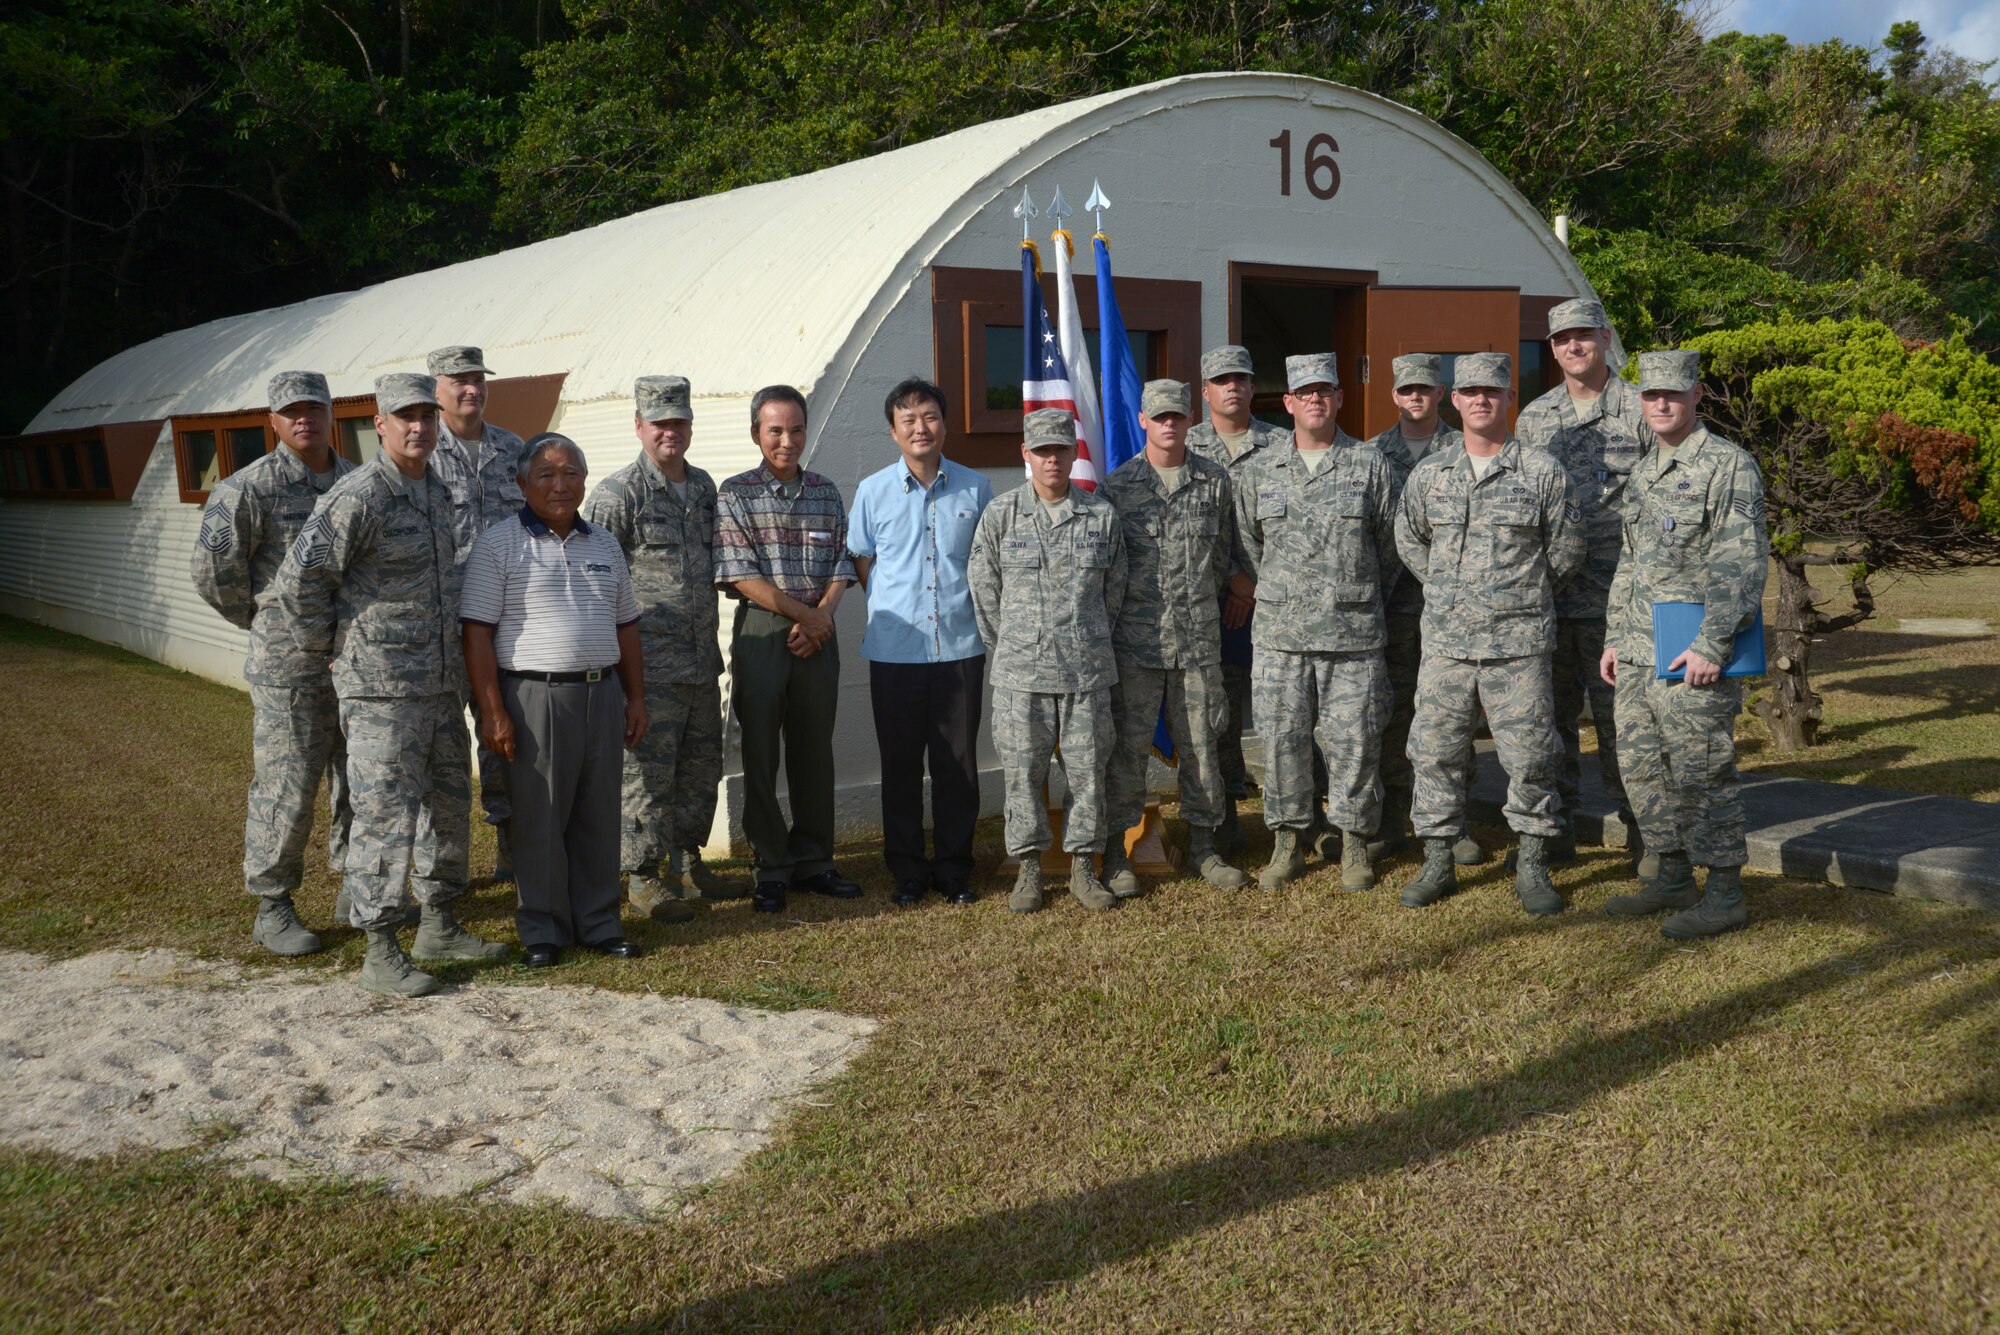 Members of the 18th Civil Engineer Squadron who volunteered their time and skills to renovate the last standing Quonset hut on Kadena Air Base, Japan, stand in front of the newly unveiled piece of Kadena history, along with Col. Charles McDaniel, 18th Wing vice commander, Chief Master Sgt. Ramon Colon-Lopez, 18th Wing command chief, and distinguished guests Sadashi HIga, Kazuto Higa and Jimmy Schwartz, Aug. 12, 2013. (U.S. Air Force photo by Tech. Sgt. Jocelyn Rich-Pendracki/Released)